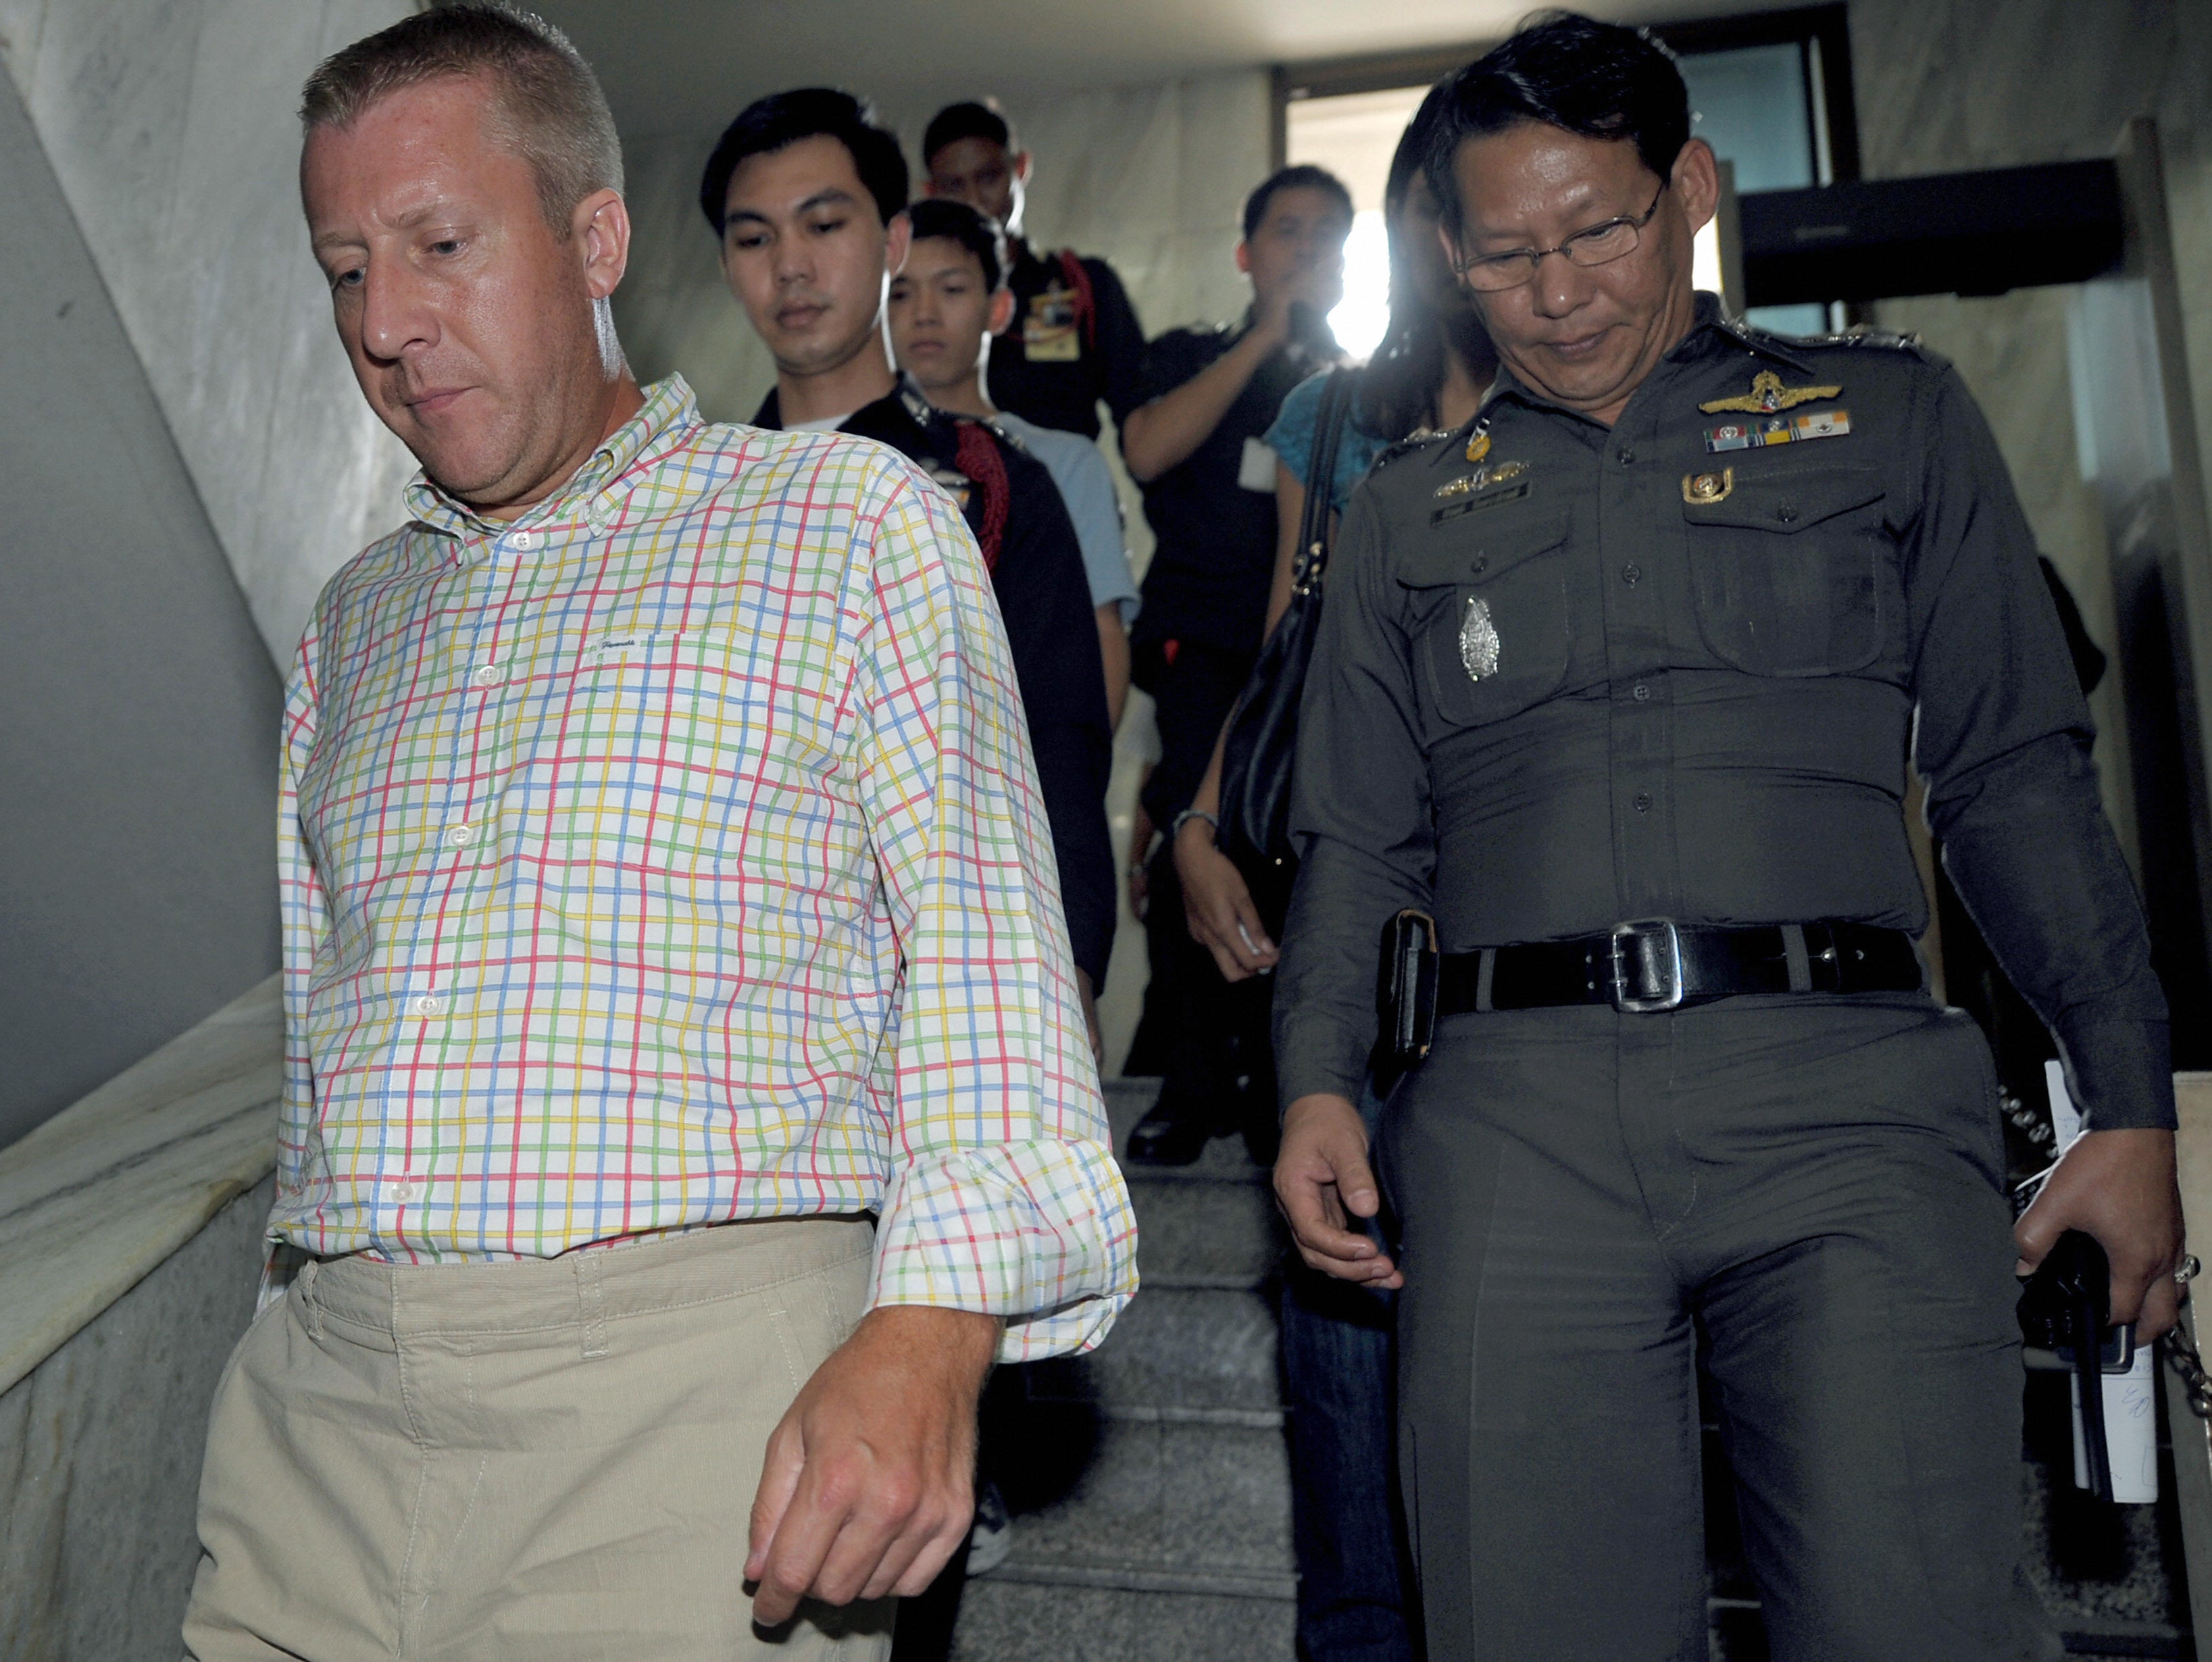 Mr Smith spent just over two years in a Thai jail fighting his case before being extradited to the UAE in 2011